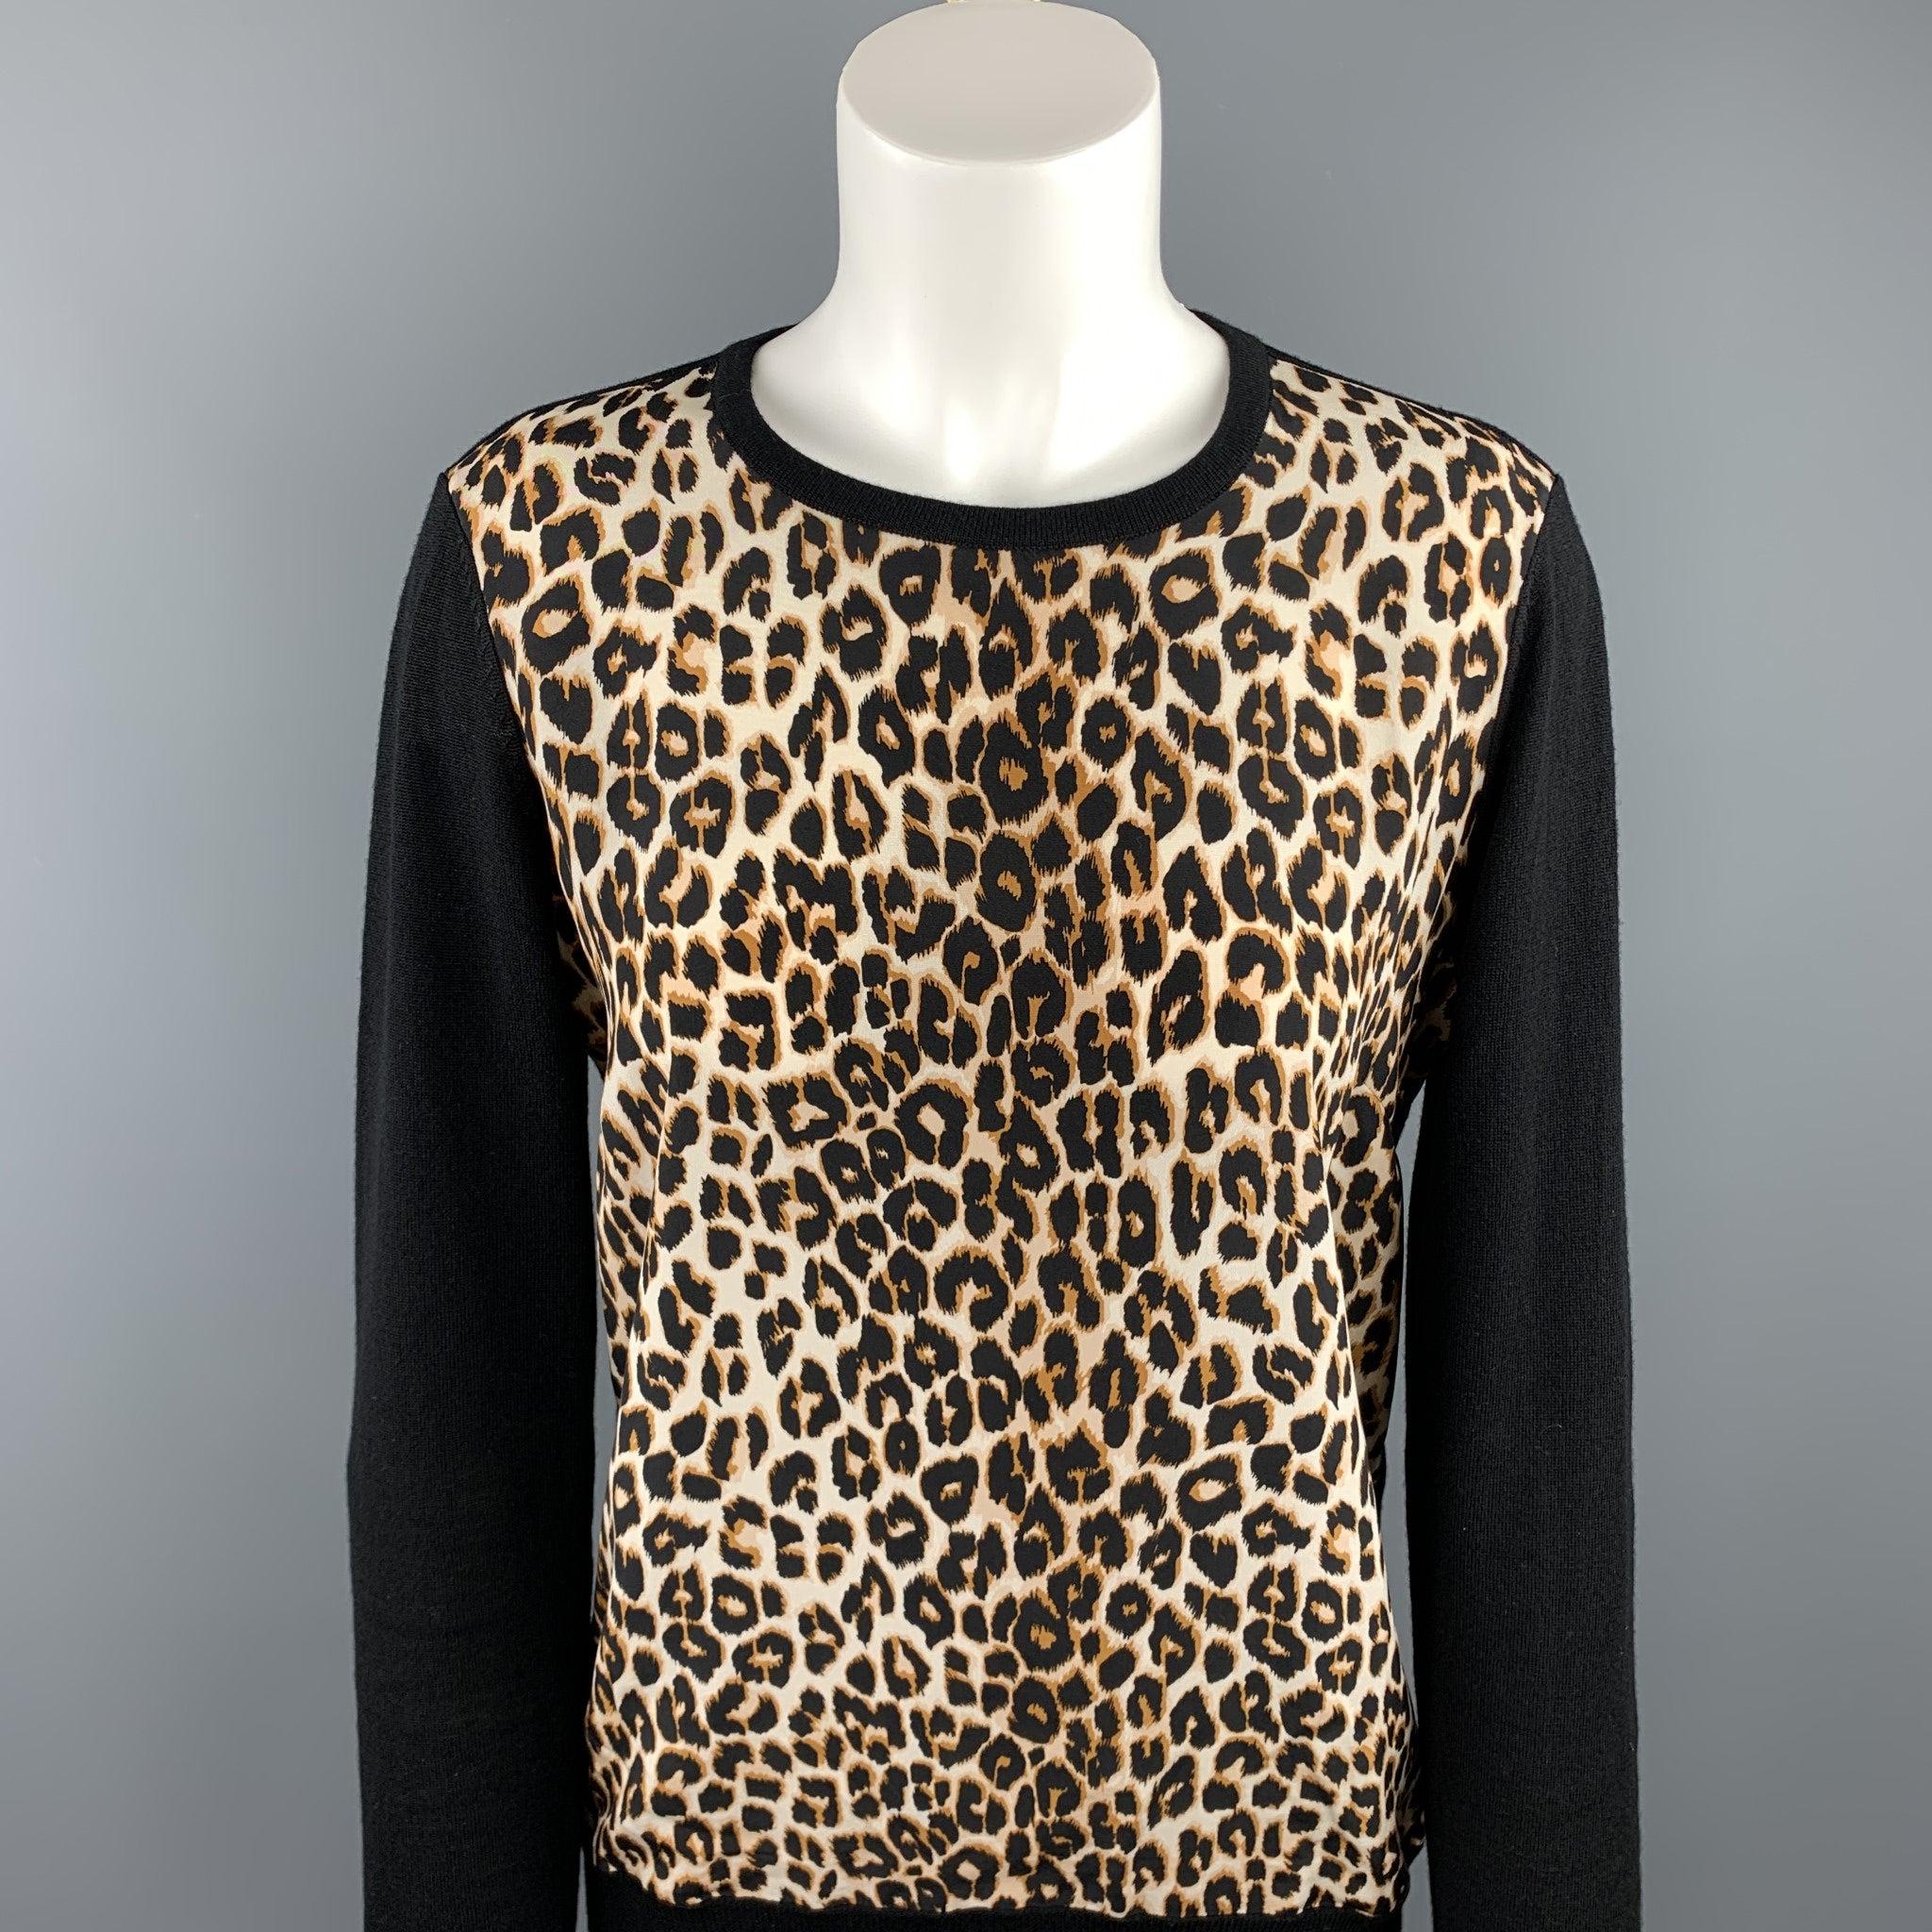 EQUIPMENT FEMME pullover comes in a black & tan leopard wool / silk featuring a crew-neck.Excellent Pre-Owned Condition. 

Marked:   S 

Measurements: 
 
Shoulder: 16 inches  Bust: 38 inches  Sleeve: 26 inches  Length: 25 inches  
  
  
 
Reference: